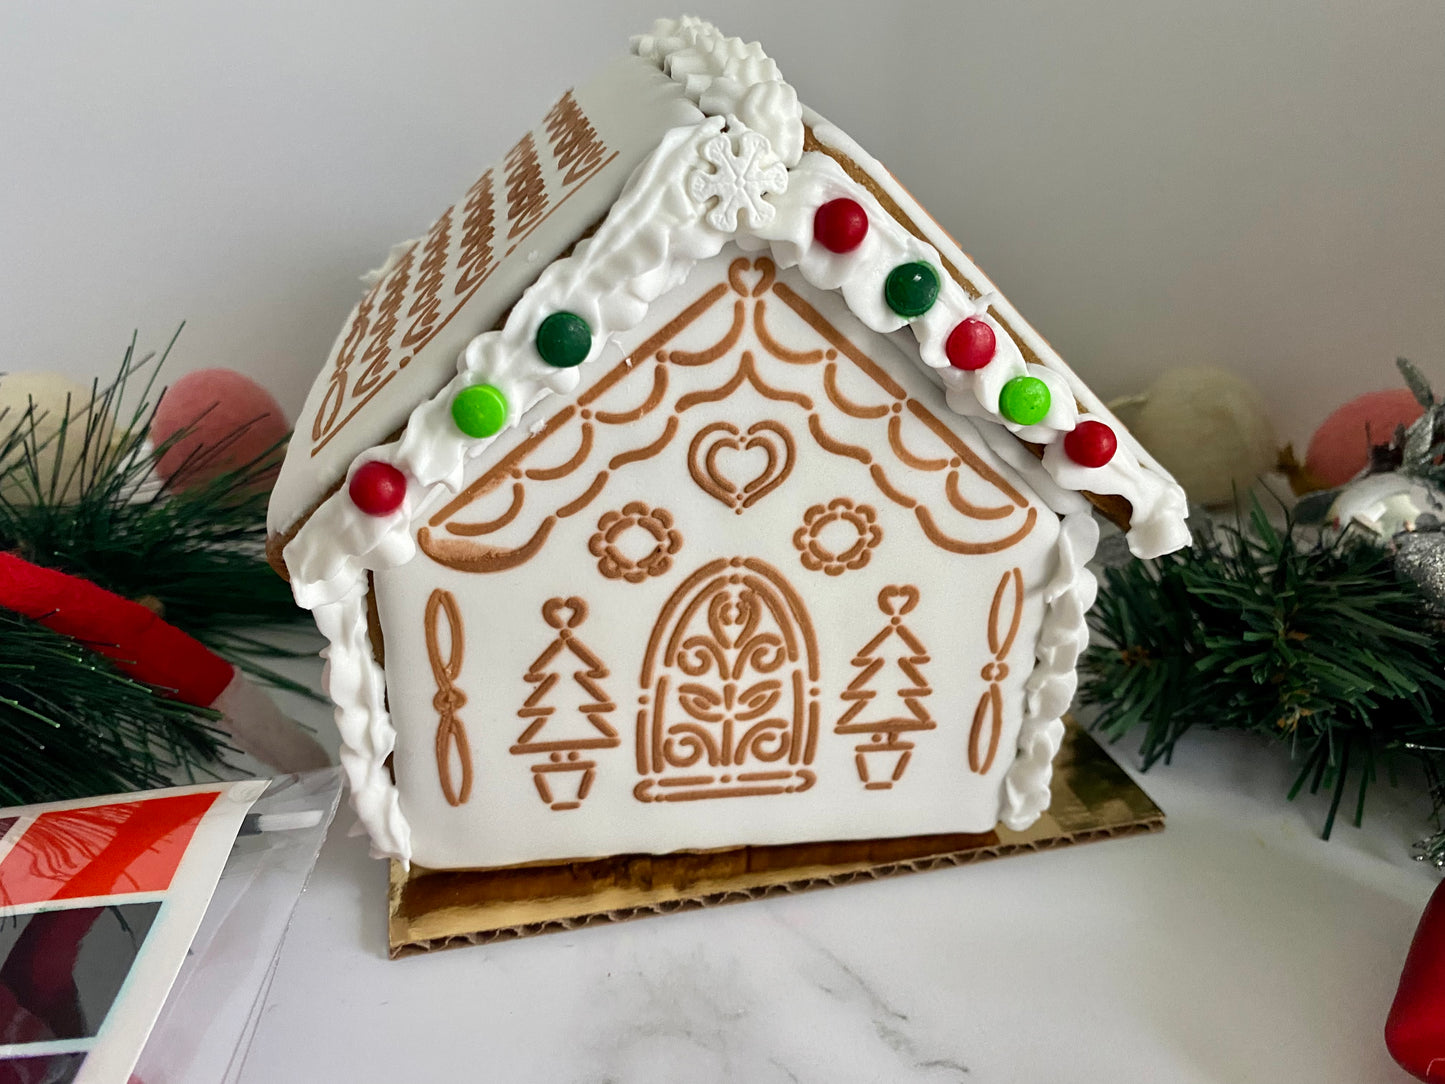 Paint your own Gingerbread House Kit